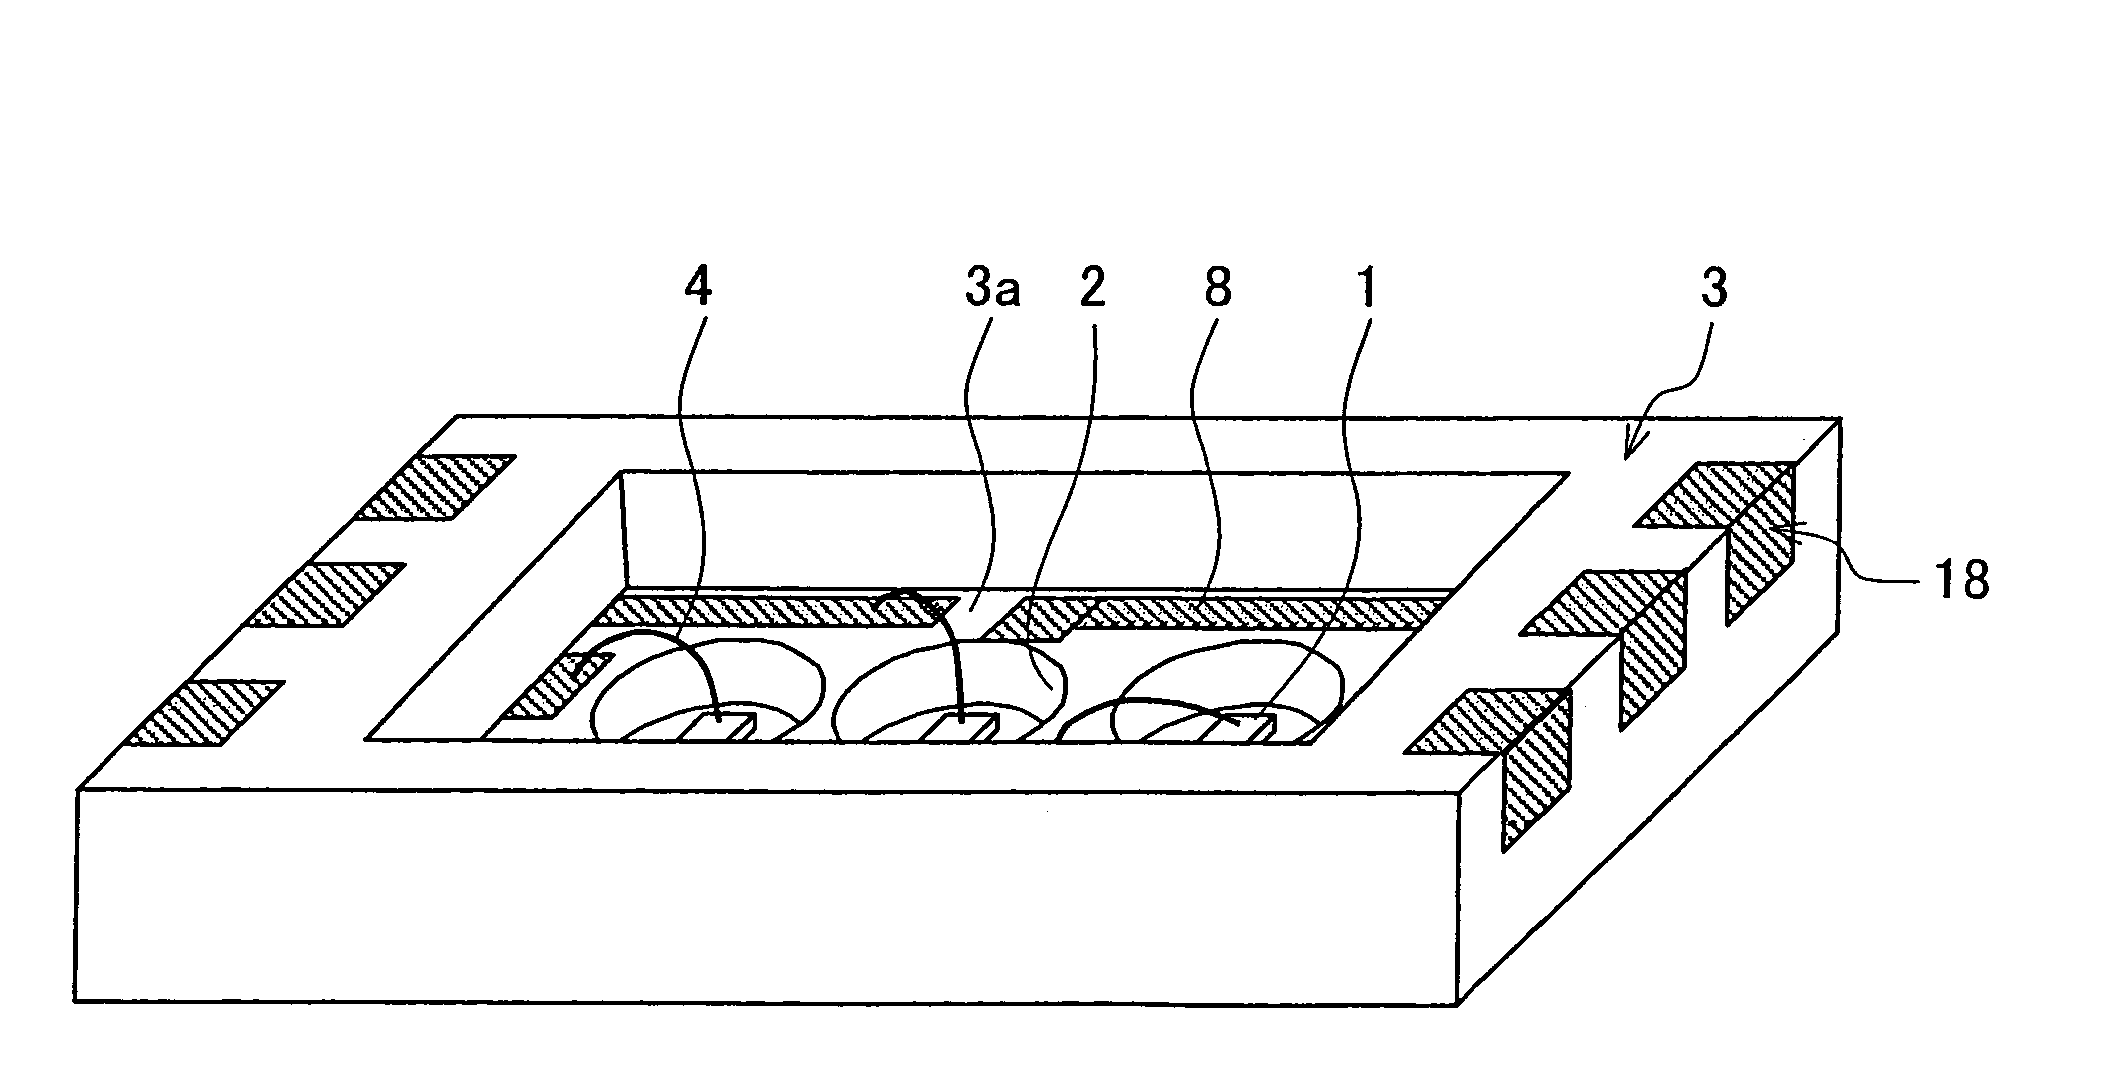 Backlight device for liquid crystal display including a plurality of light emitting diodes within their own concaves aligned in a straight line within a larger concave